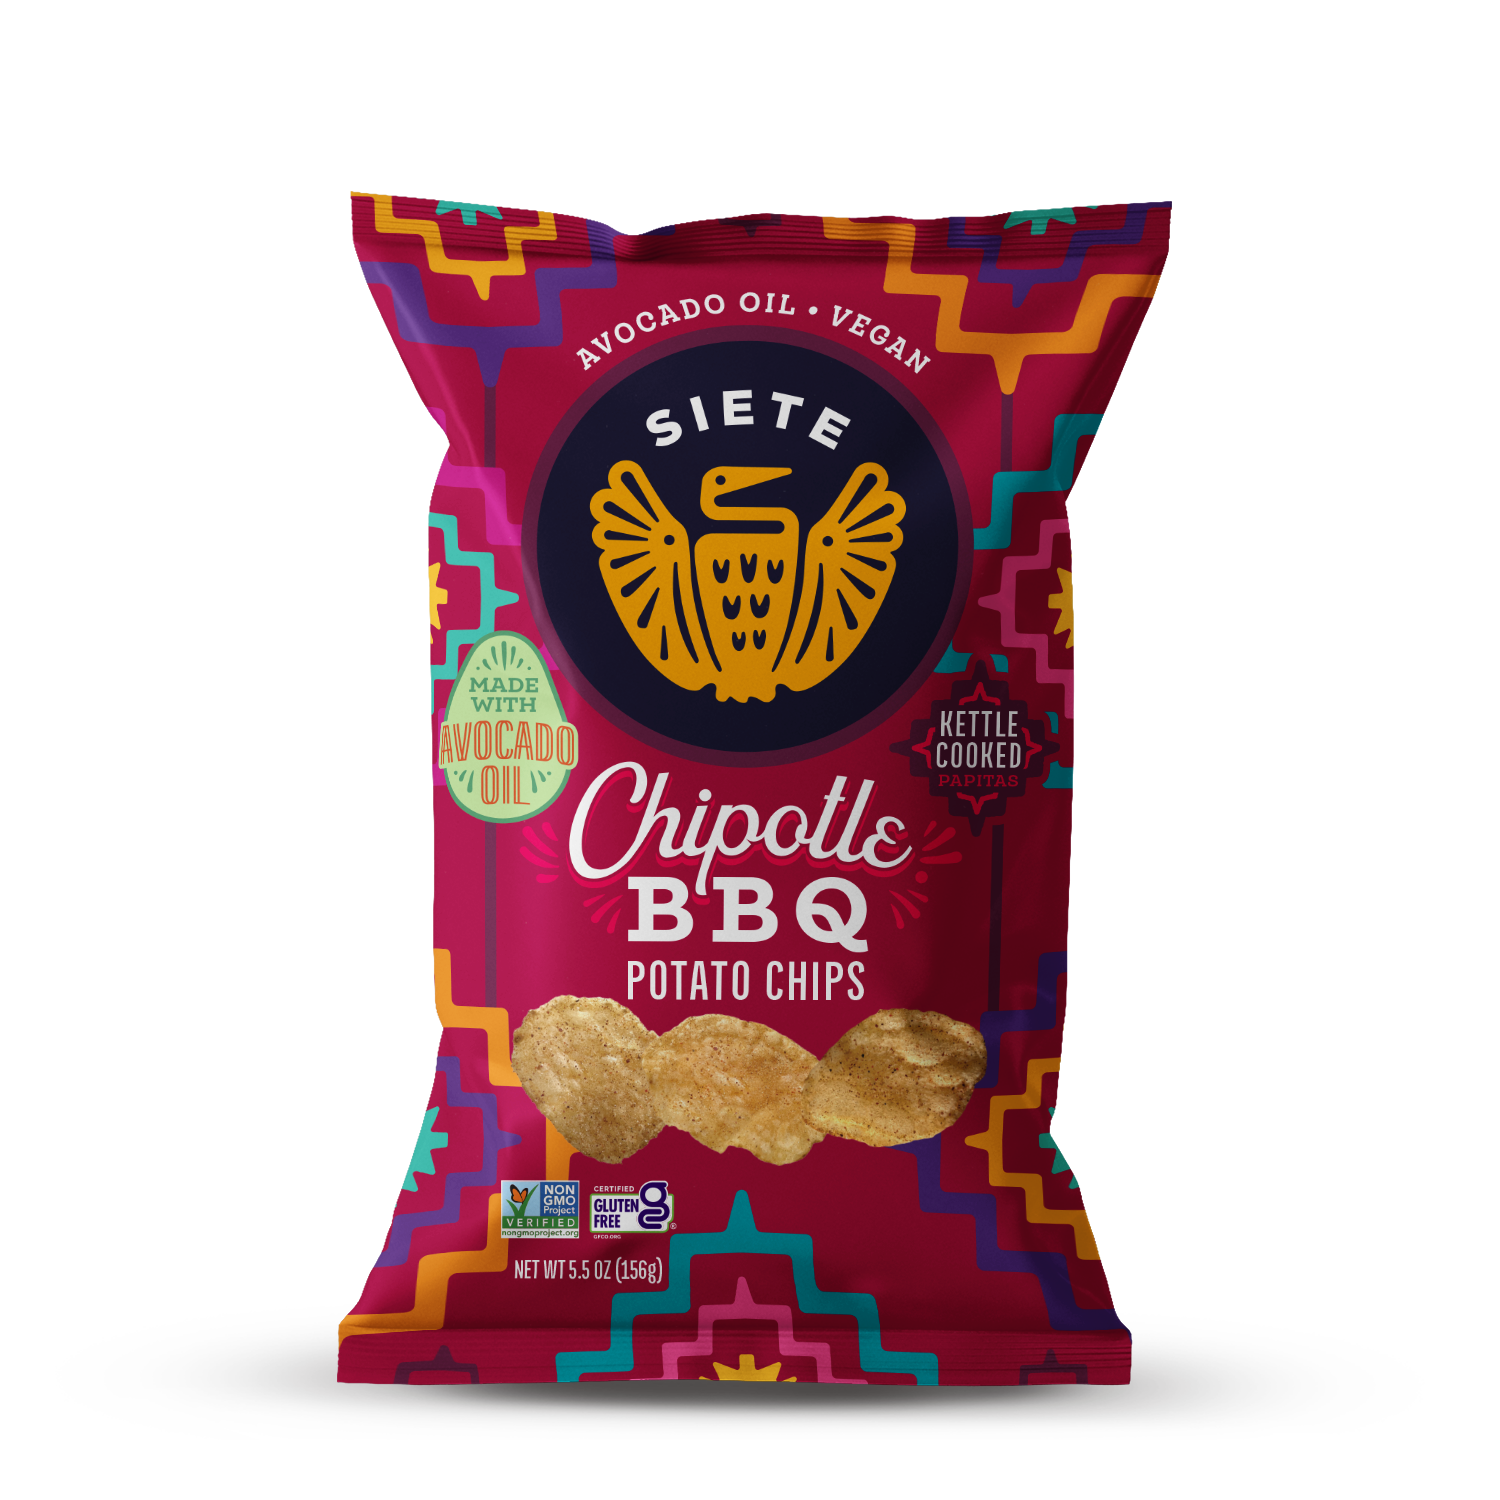 Chipotle BBQ Kettle Cooked Potato Chips - 6 bags